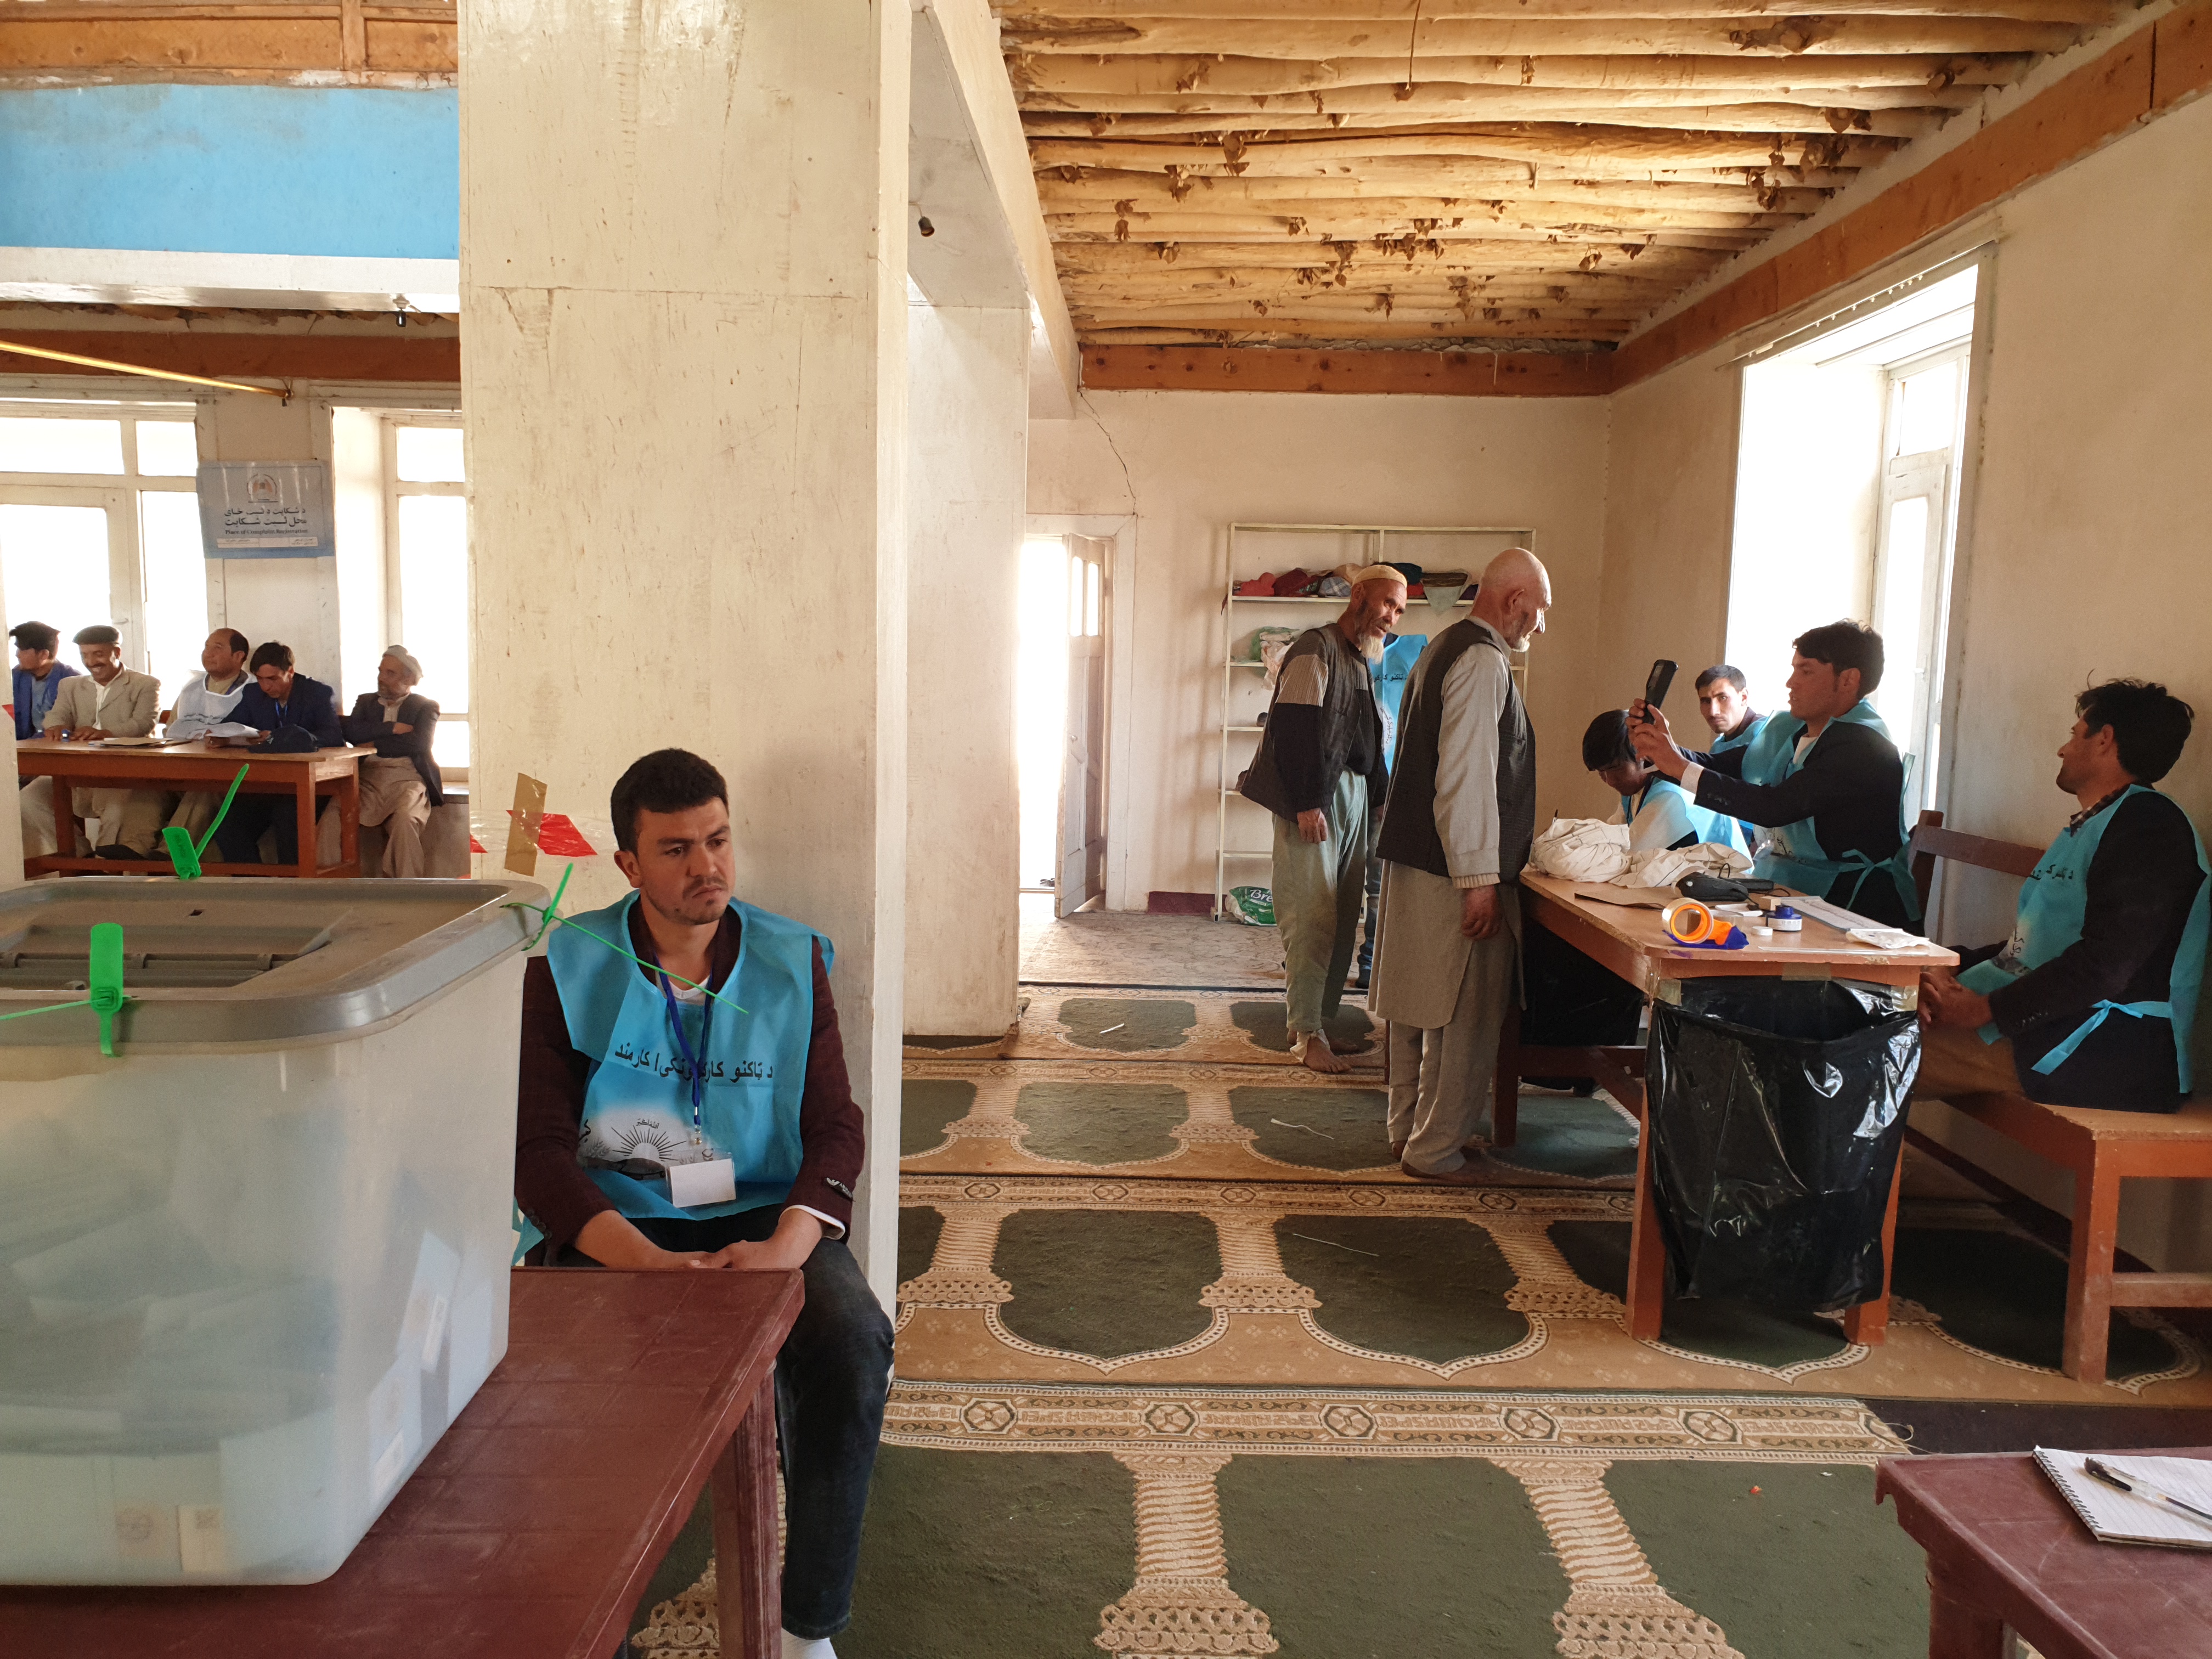 A BVV operator takes a photo of a voter’s face, while a ballot controller looks on, the ballot box controller waits and a group of agents and observers look on at the Shinya Madrasa in Foladi, Bamyan. Photo: Ali Yawar Adili, 28 September 2019